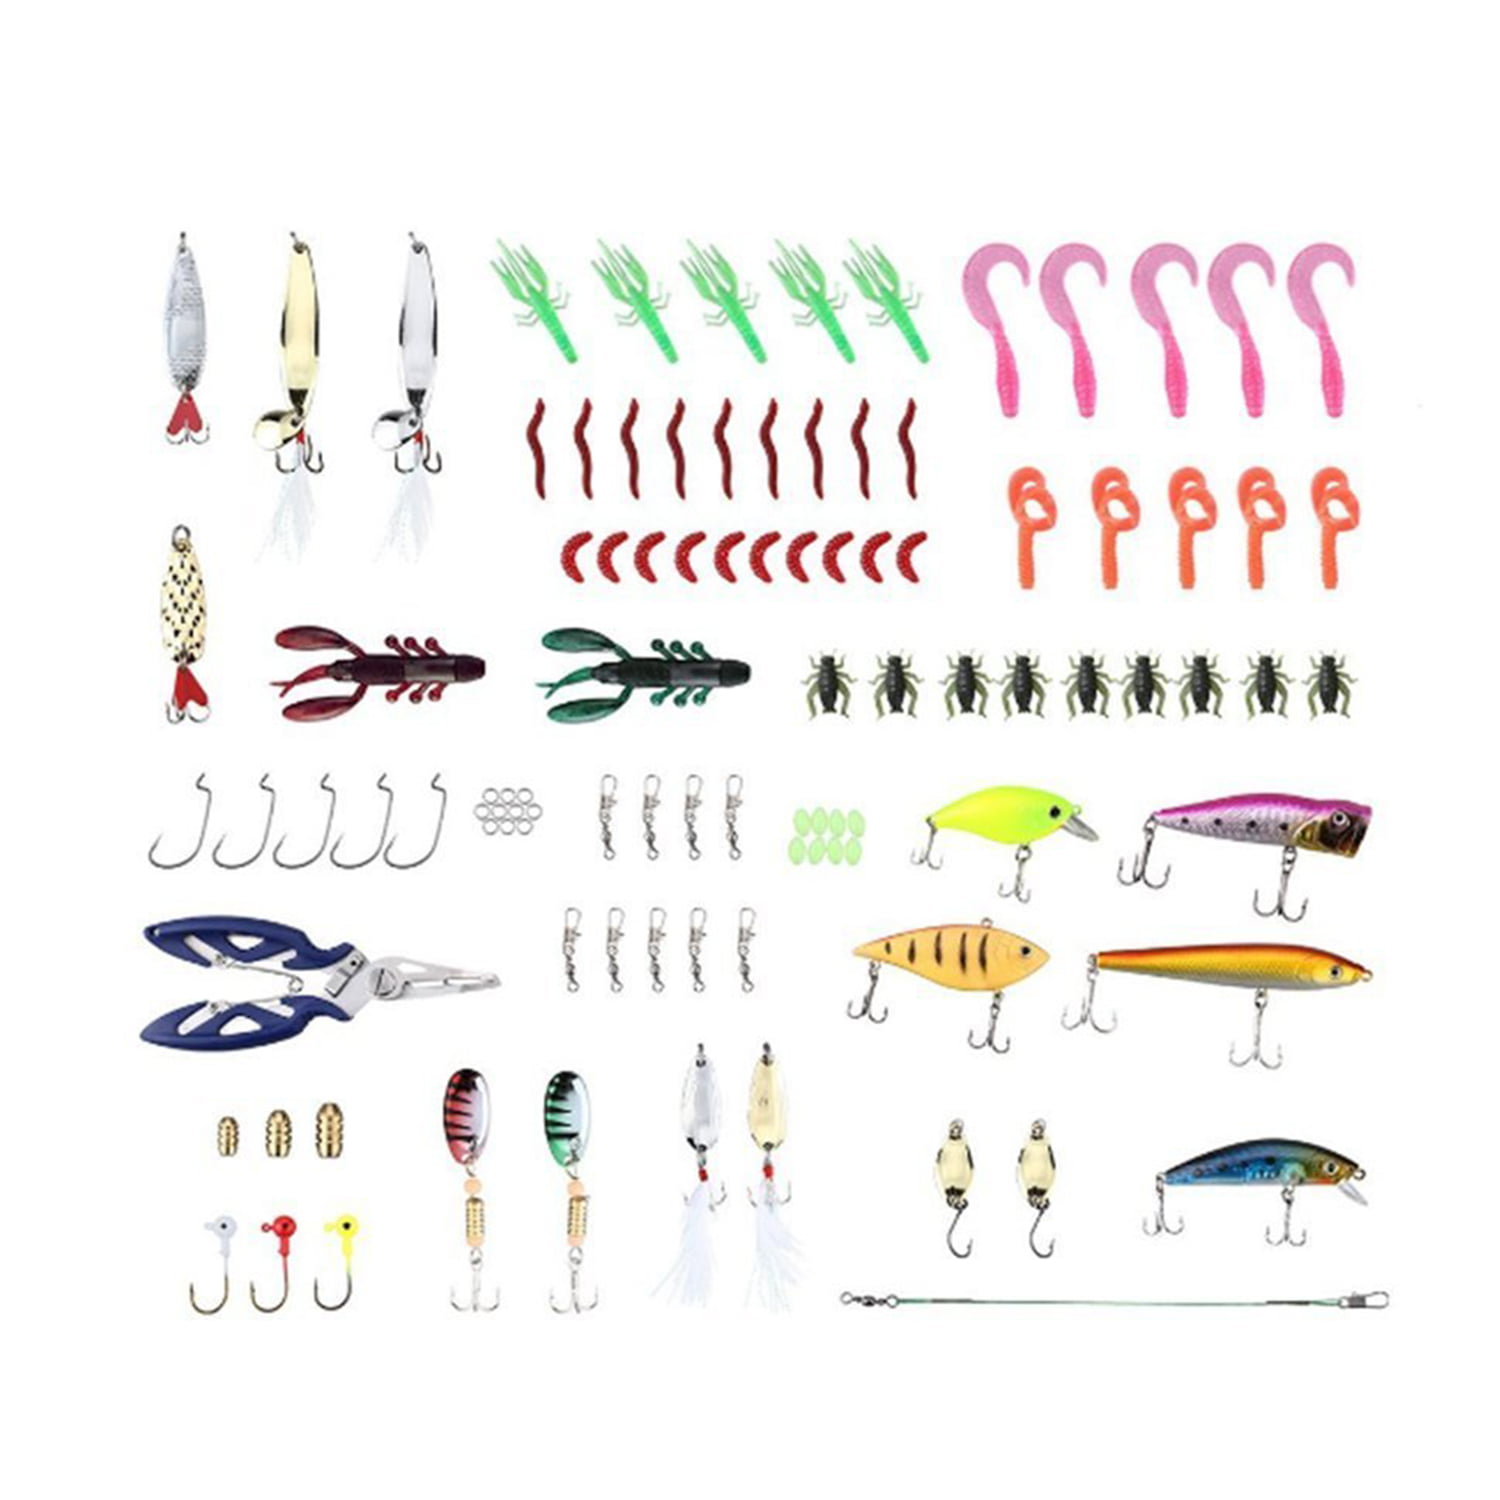 SUPERTHEO Fishing Lure Set Fishing Spoons Frog Lures Soft Hard Metal Lure  Crank Popper Minnow Pencil Jig Hook for Trout Bass Salmon with Tackle Box